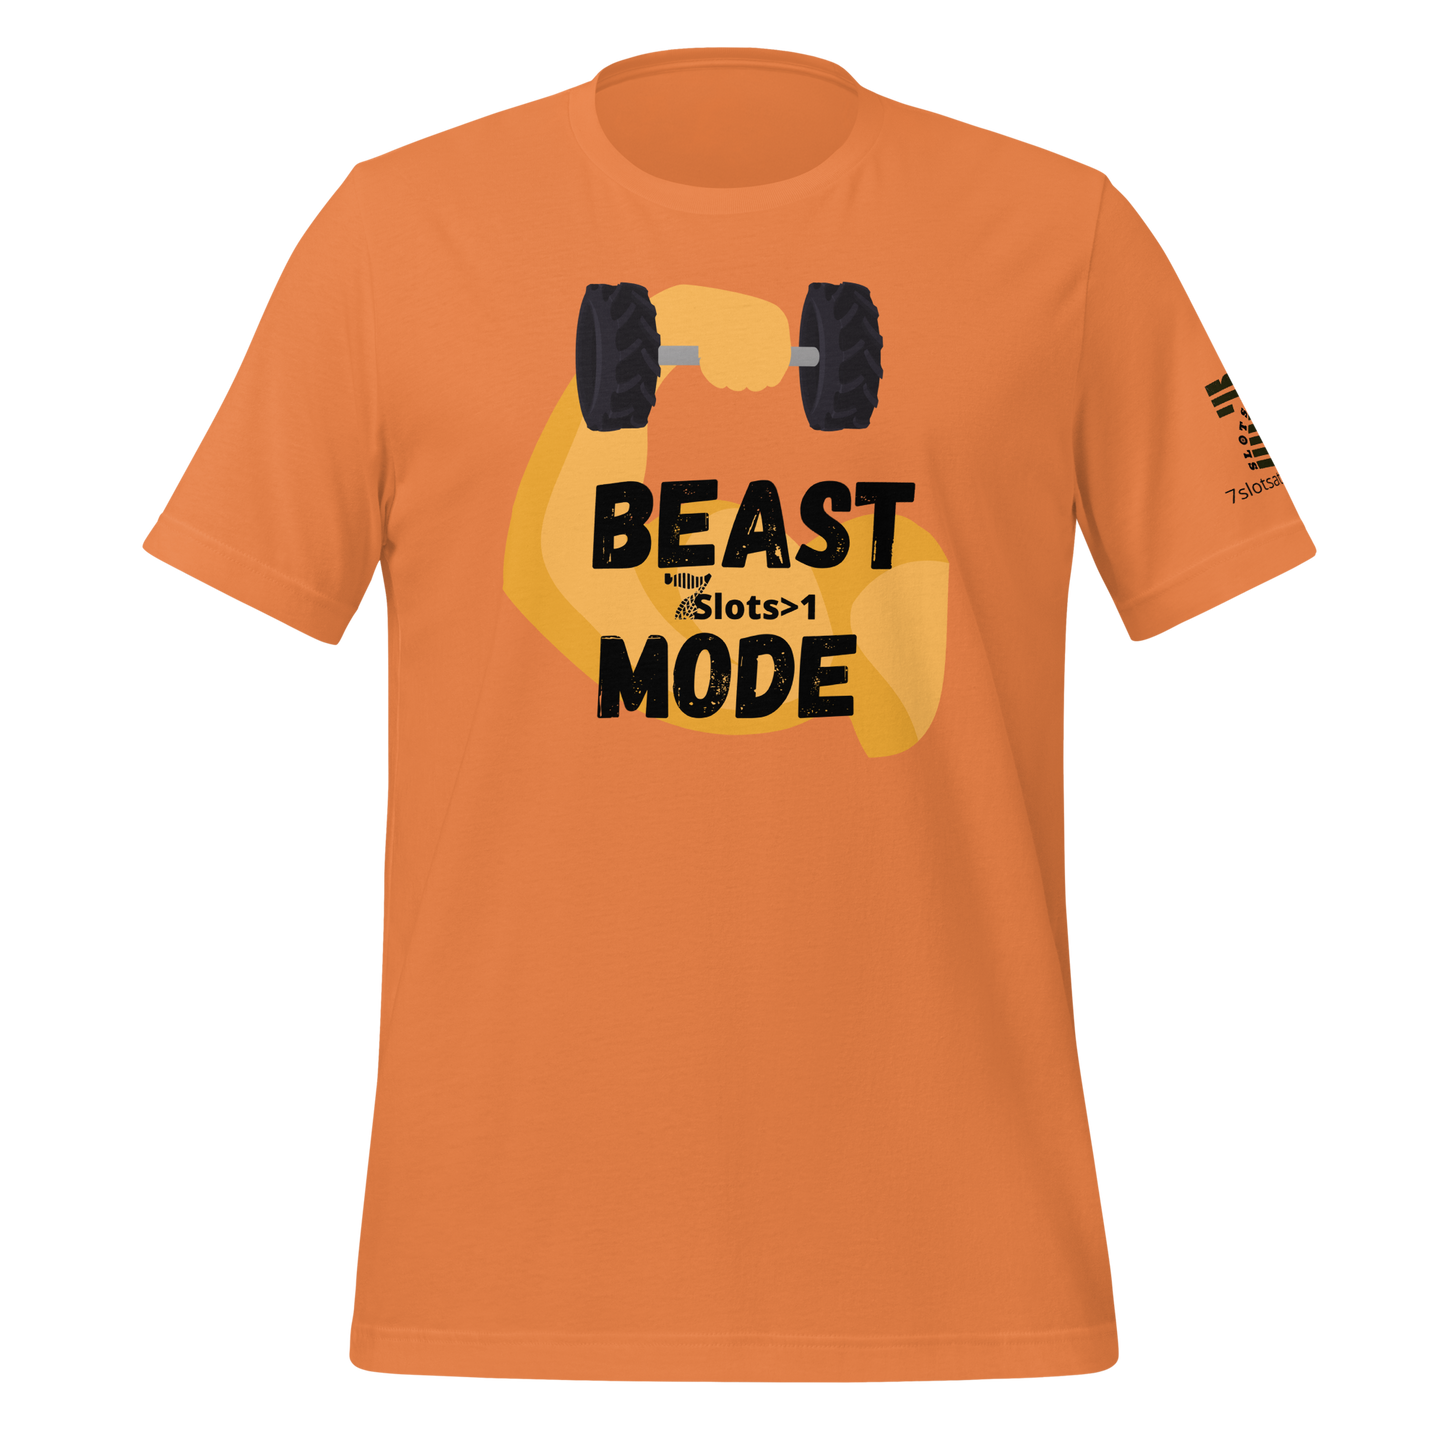 Beast Mode Activated!